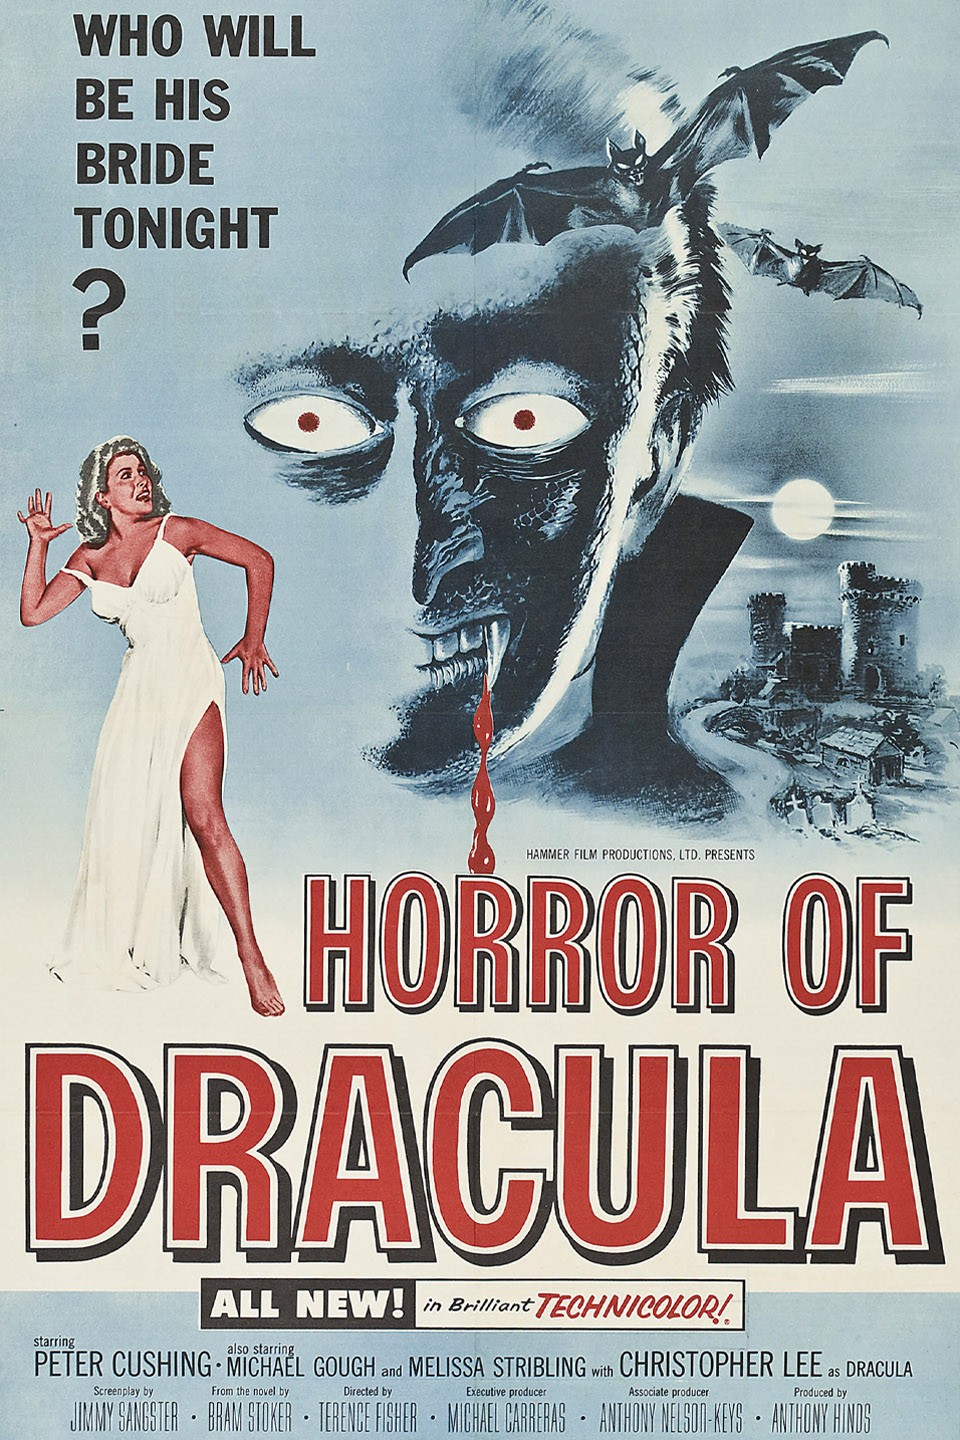 History of 3-D Horror Movies: The 1950s Golden Era